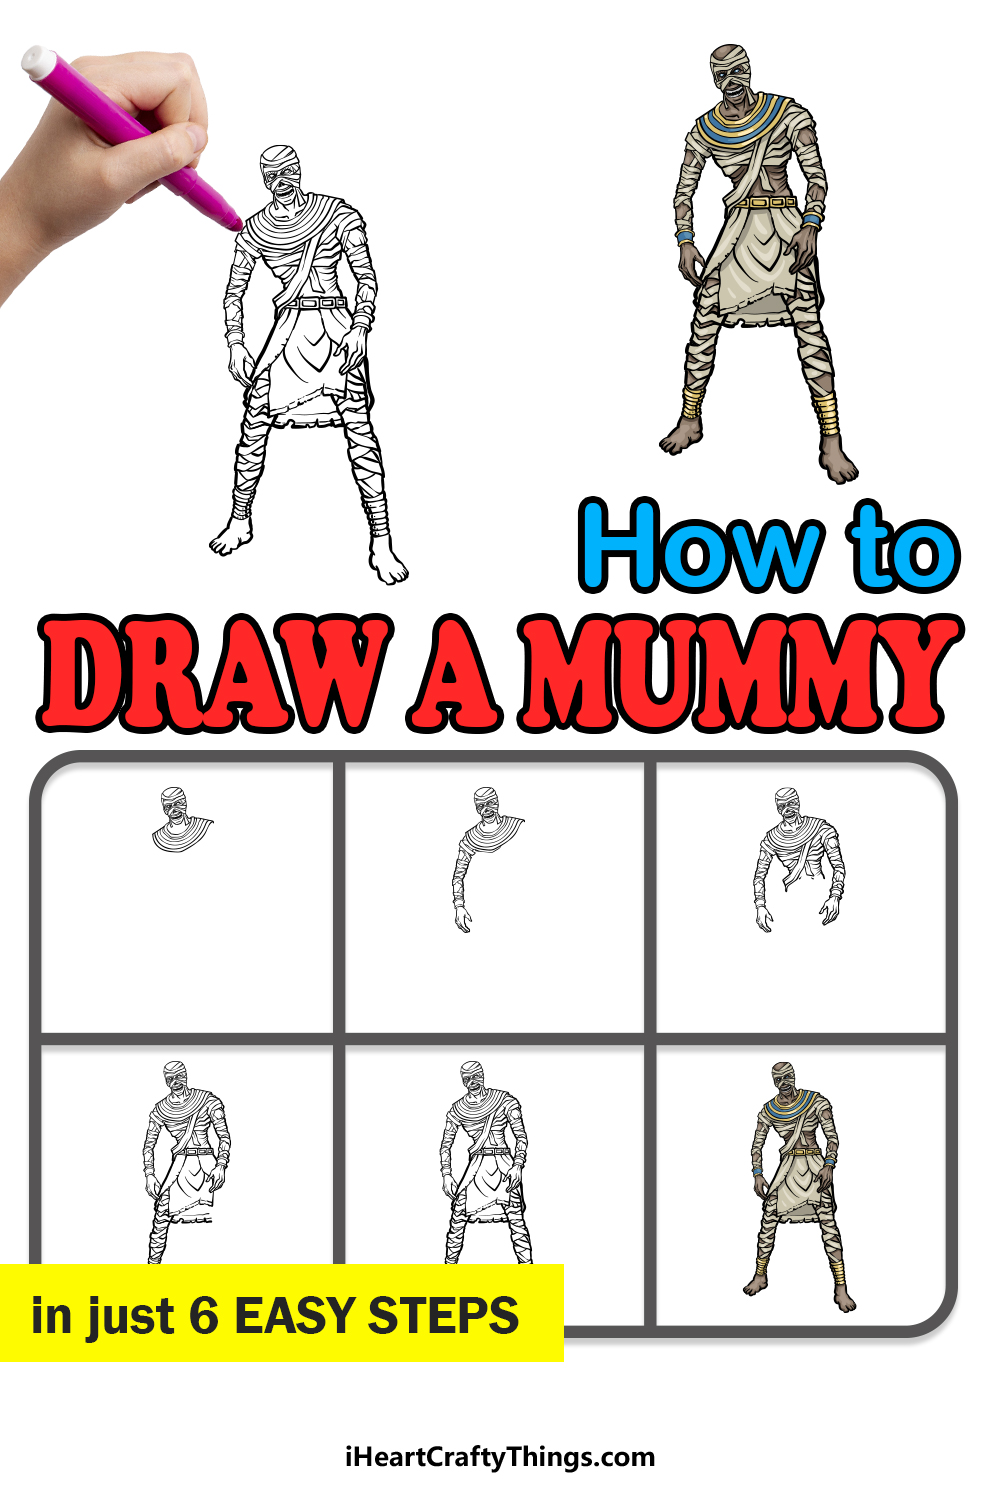 how to draw a Mummy in 6 easy steps